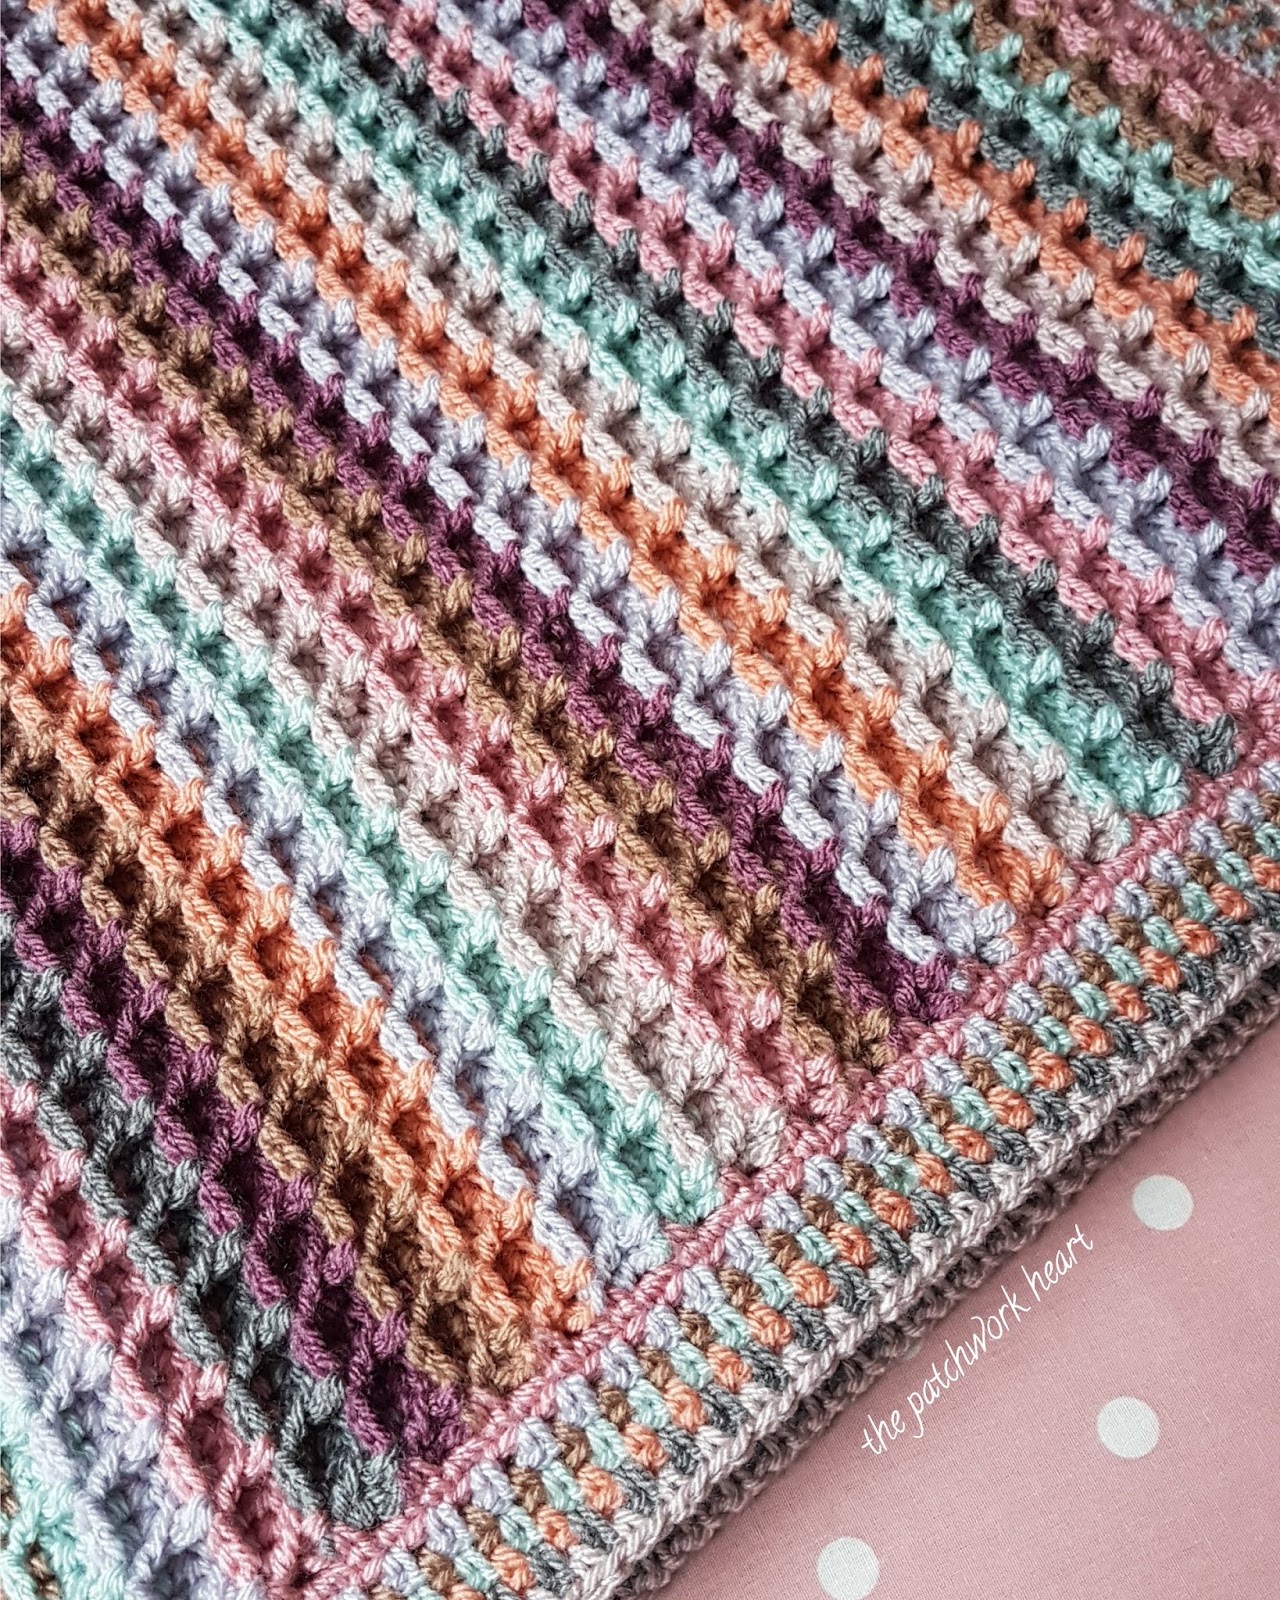 The Patchwork Heart: The waffle blanket